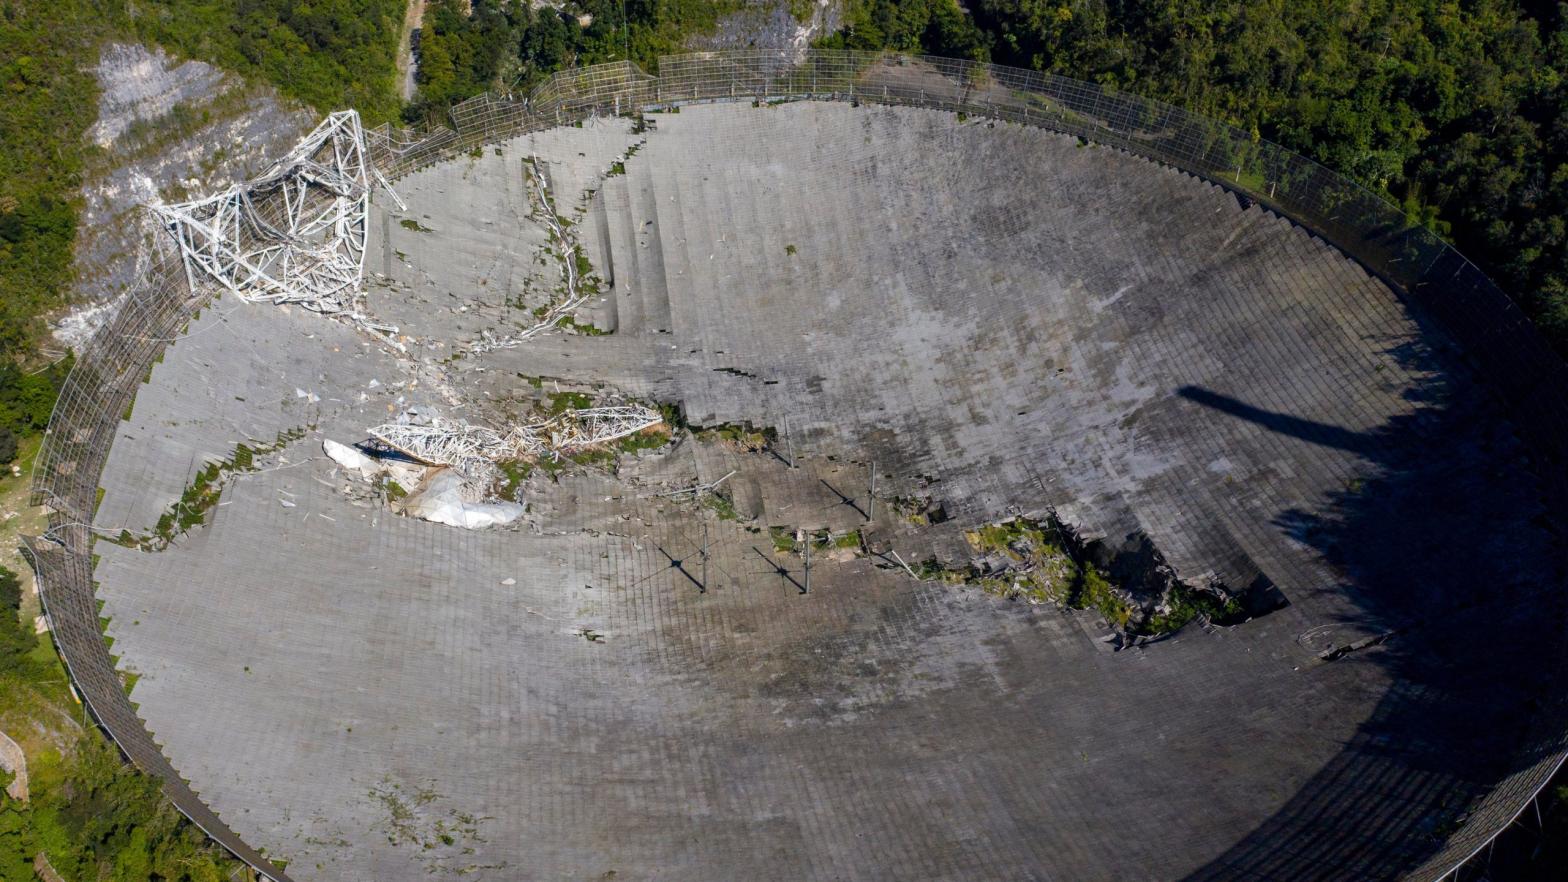 Damage at the dish following the collapse of the 816 T instrument platform. (Image: Ricardo Arduengo/AFP, Getty Images)